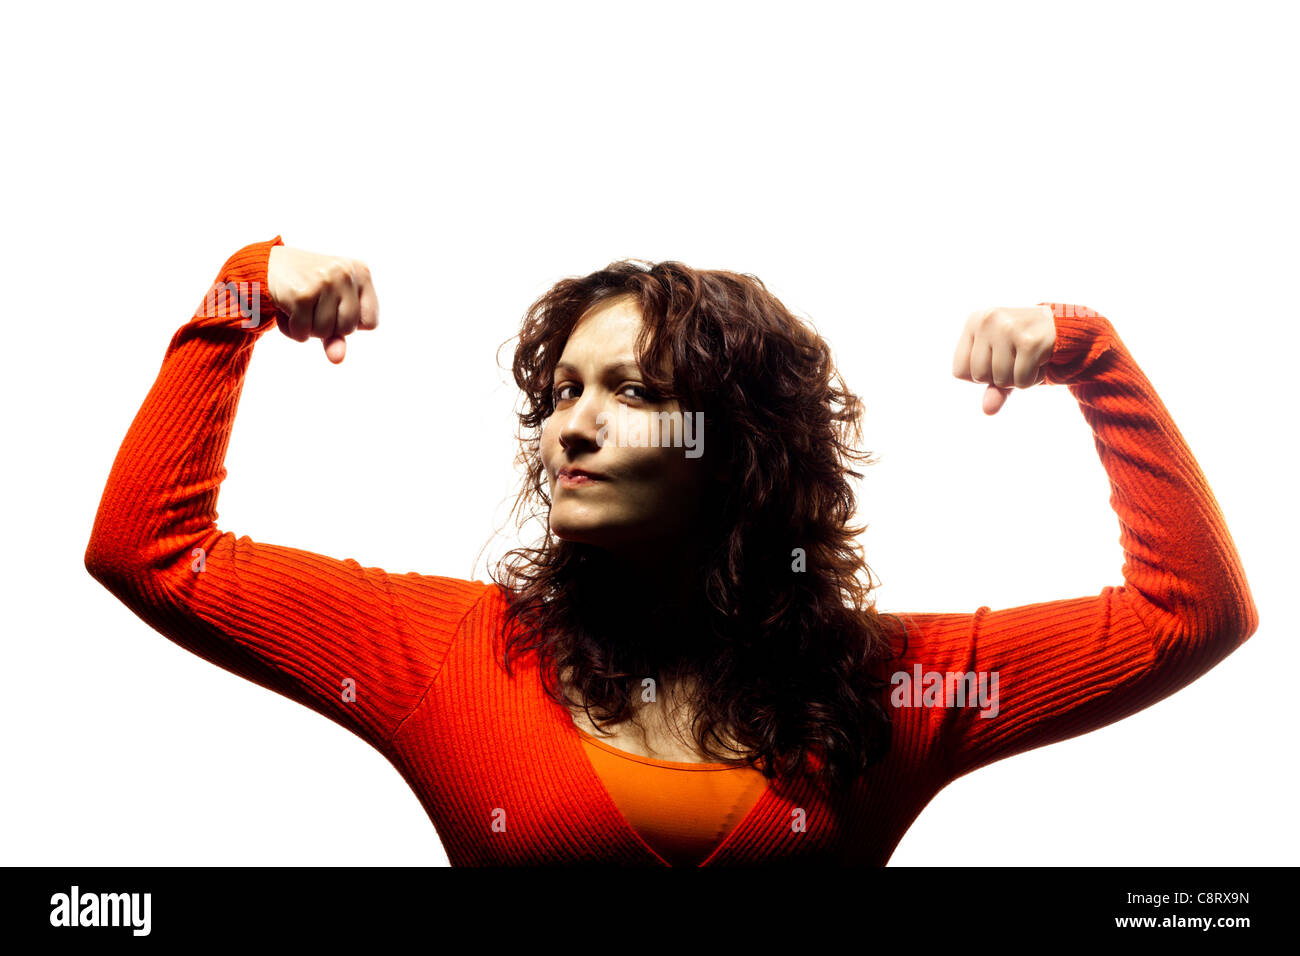 Woman Flexing Her Muscles Stock Photo